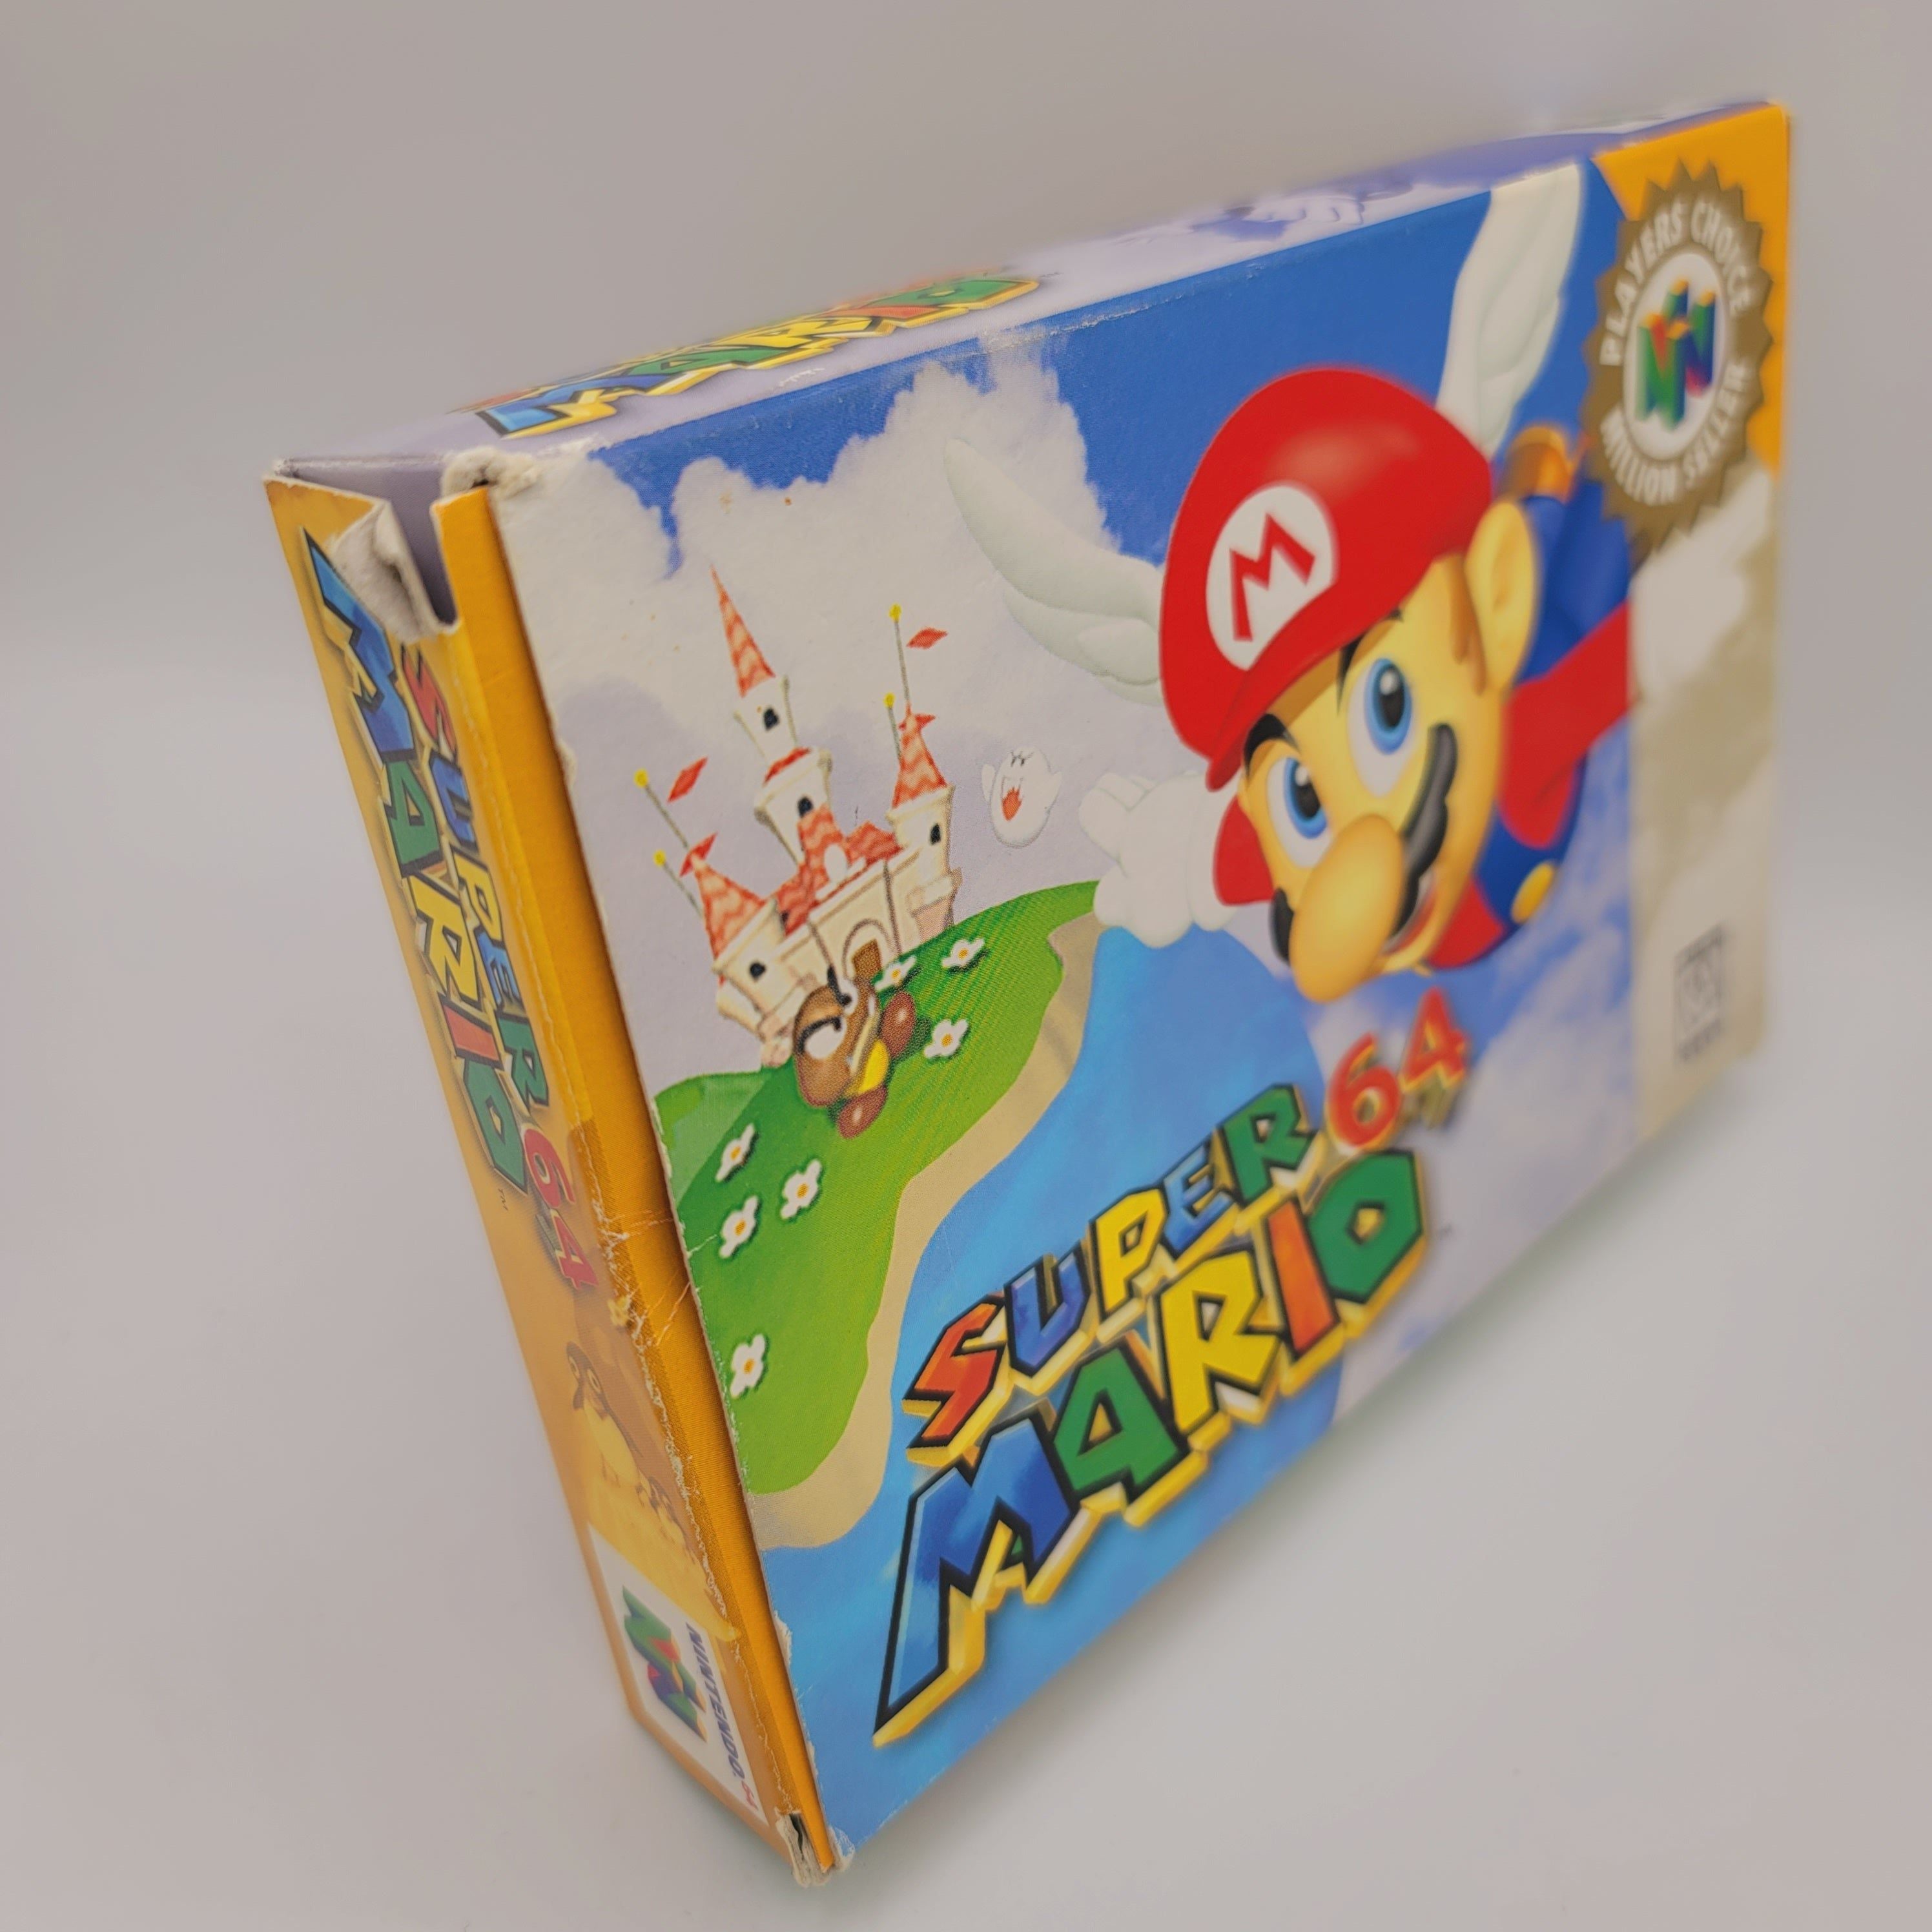 N64 - Super Mario 64 (Complete in Box / Player's Choice / A- / With Manual)